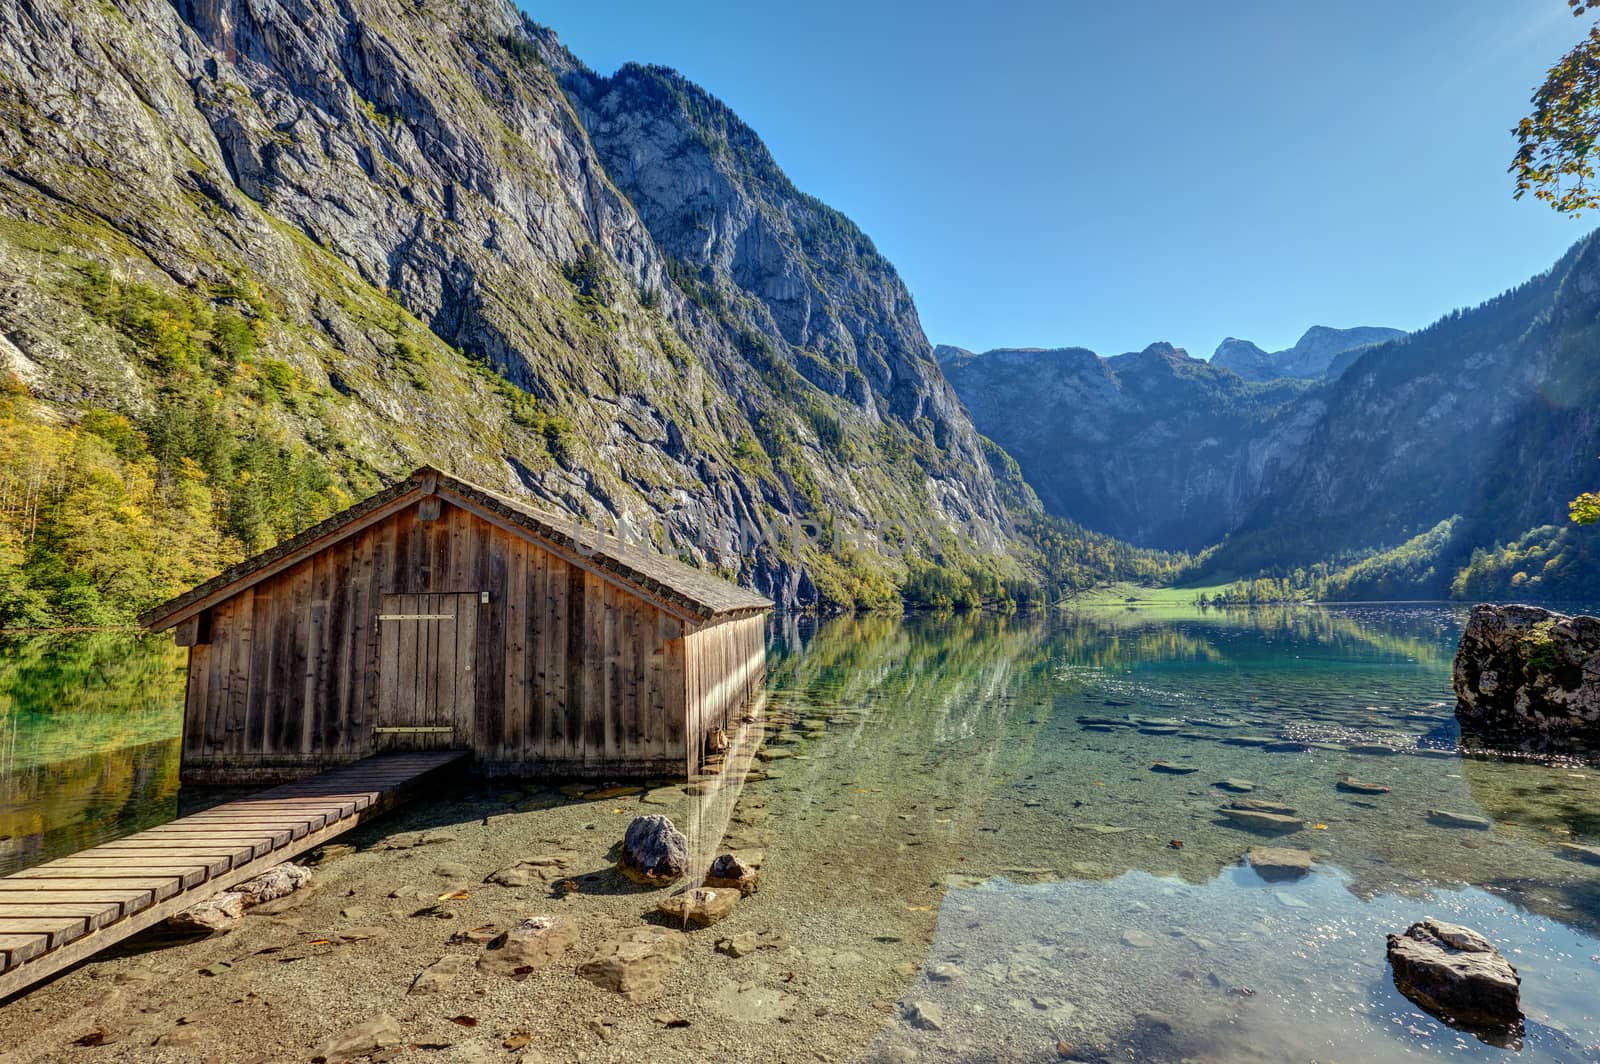 The Obersee in the Bavarian Alps with a wooden boathouse